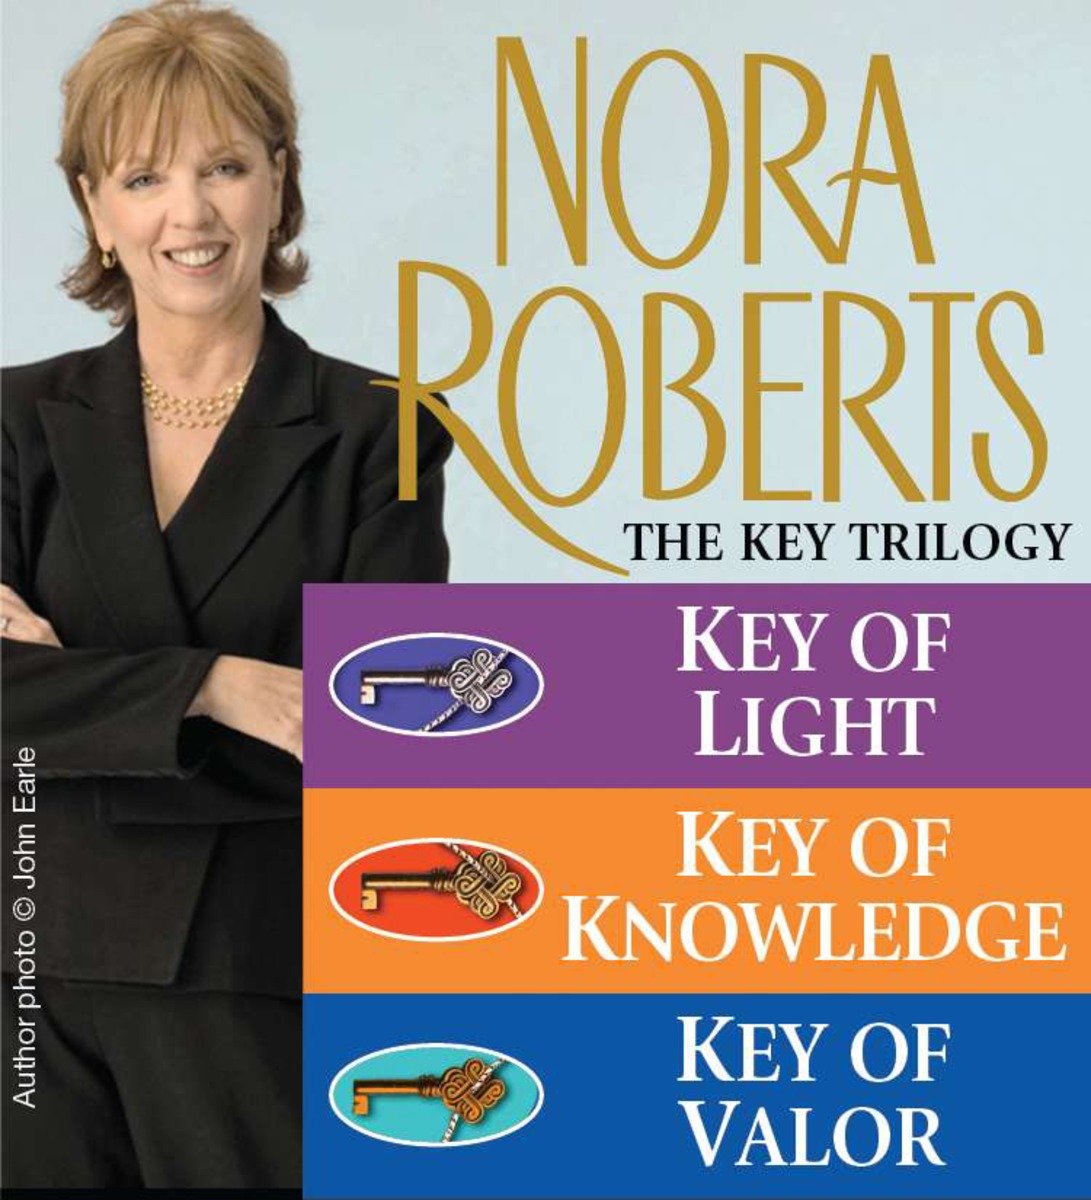 Nora Roberts' key trilogy cover image